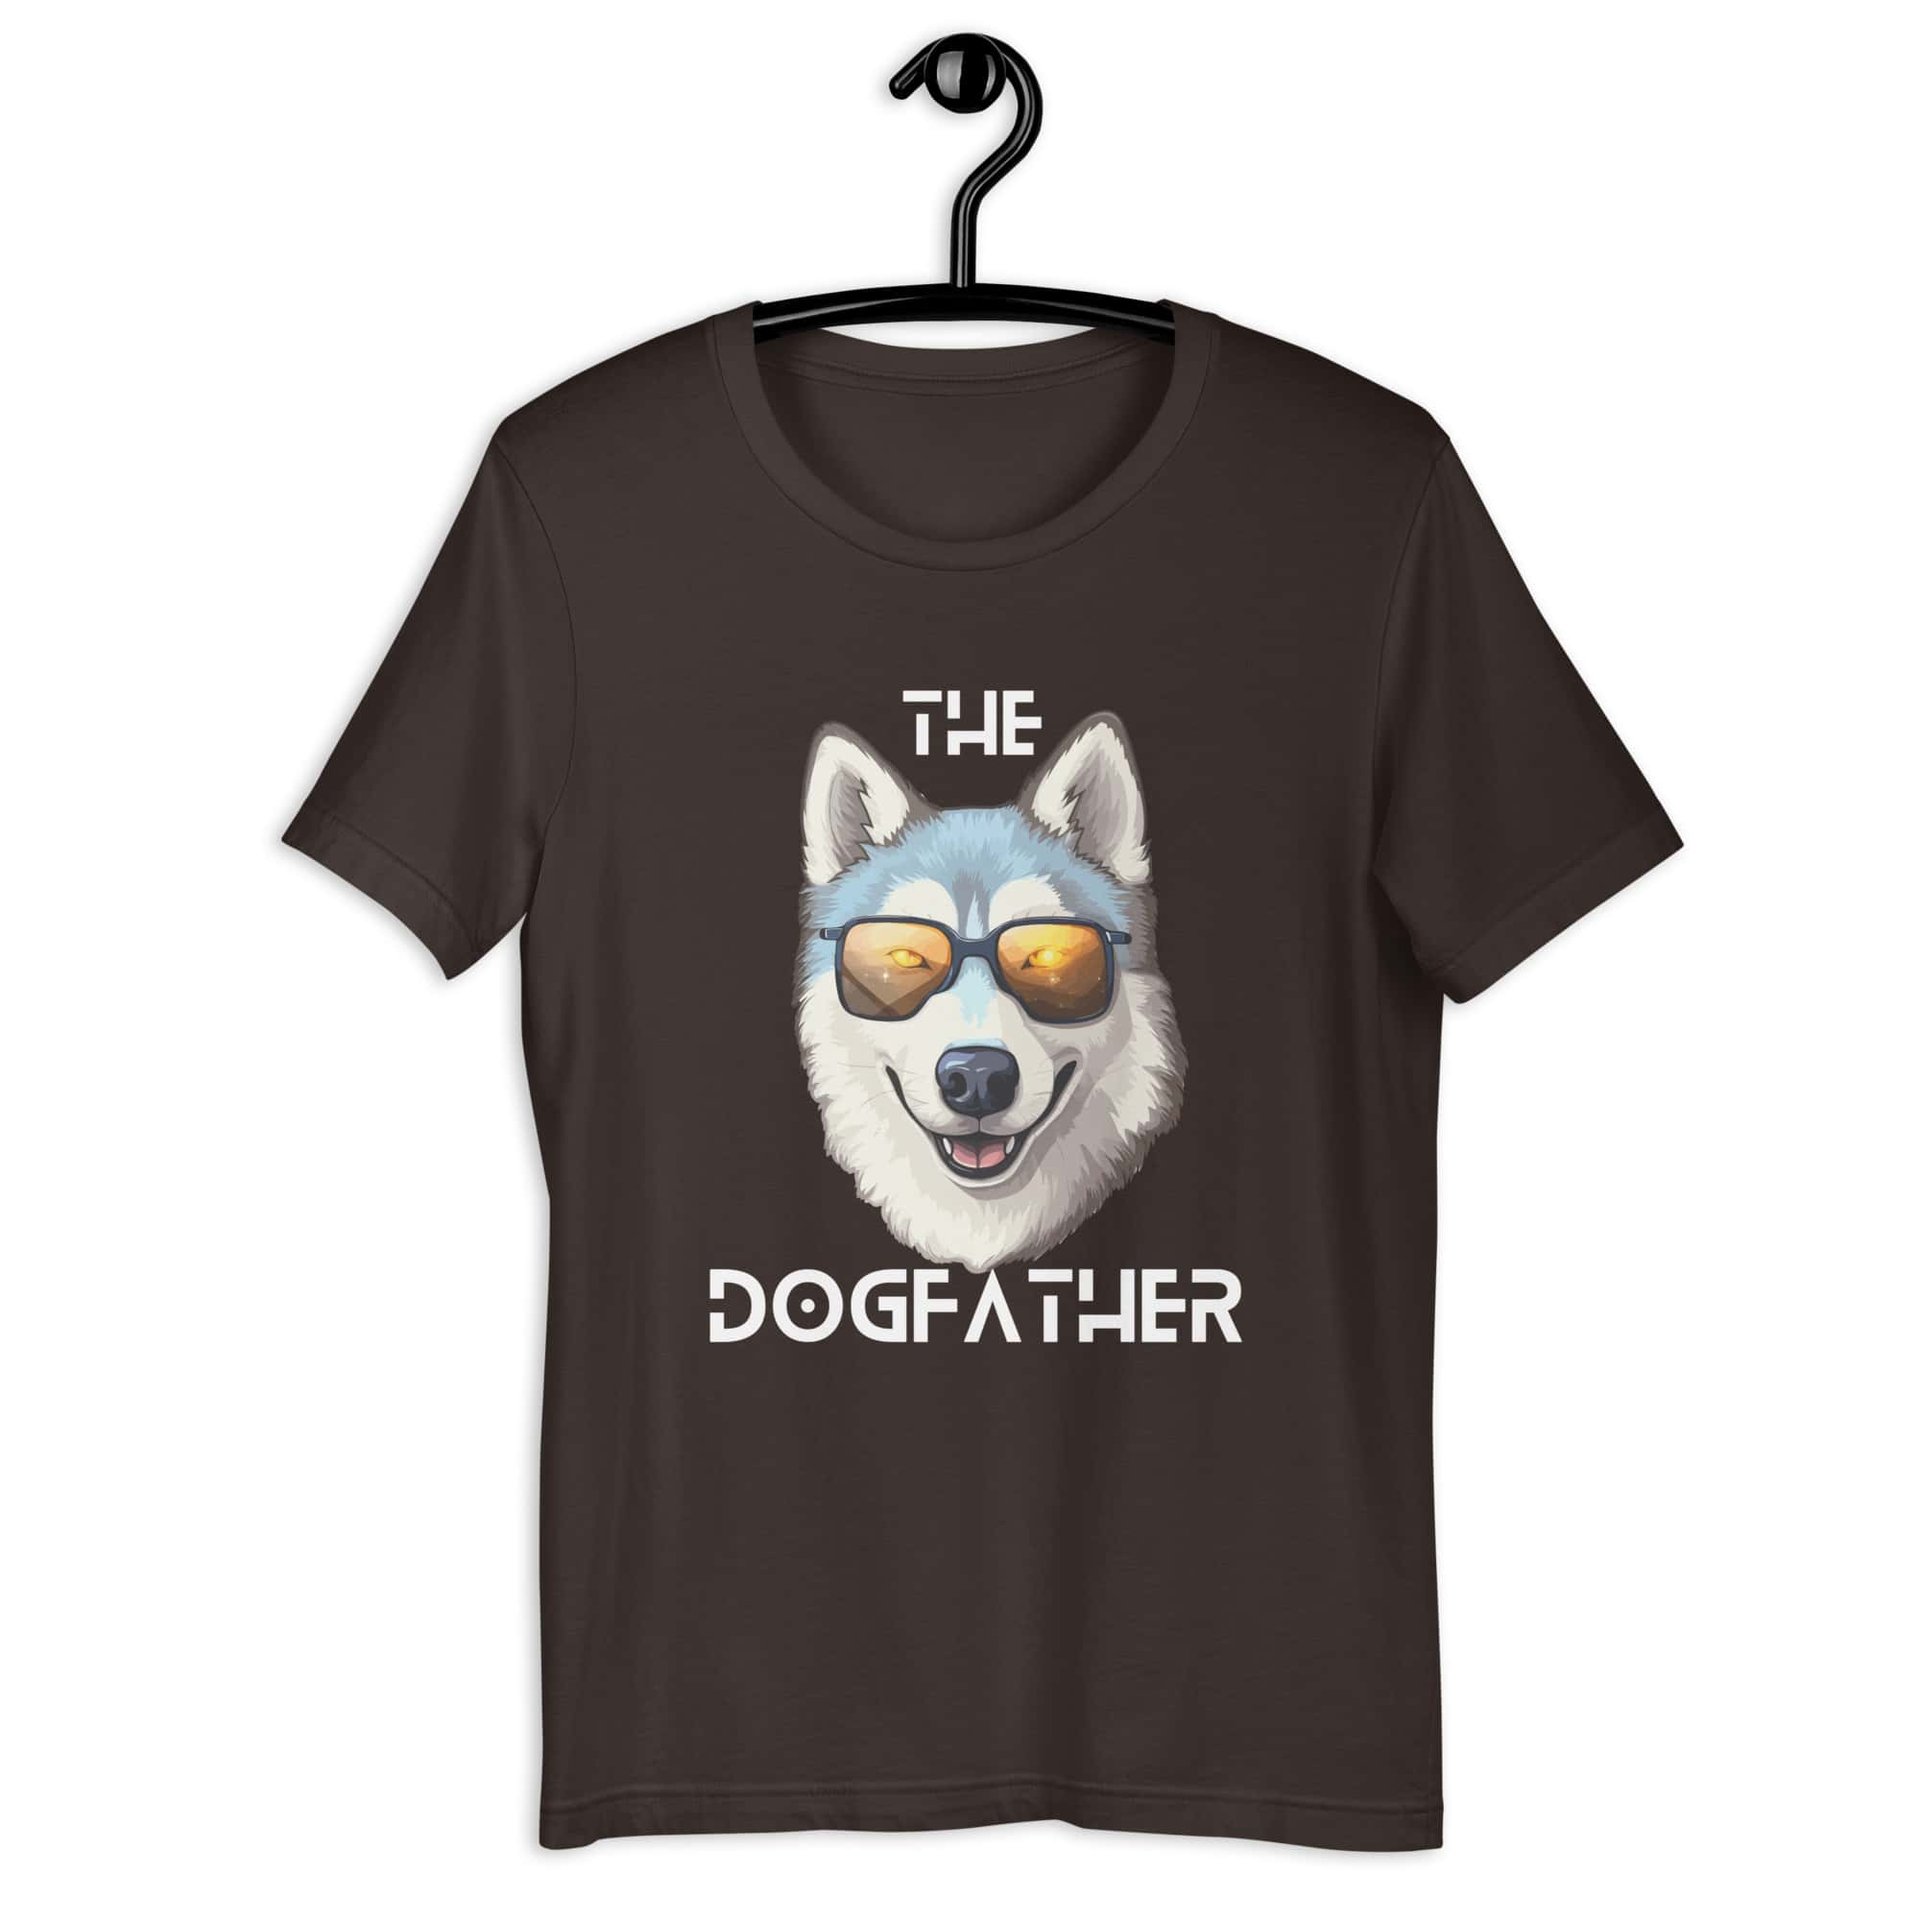 The Dogfather Huskies Unisex T-Shirt. Brown